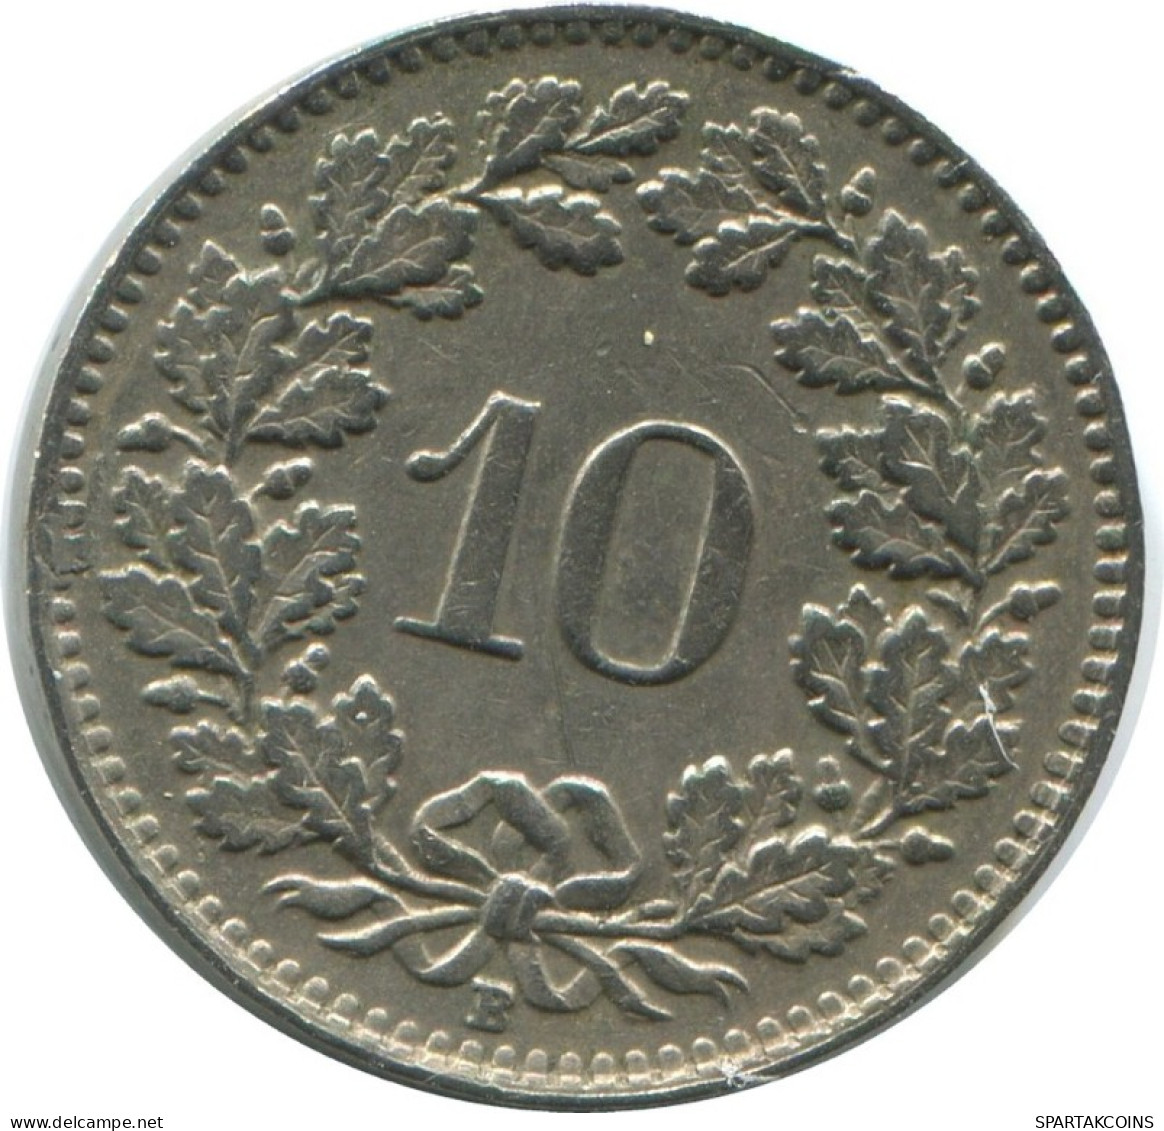 10 RAPPEN 1950 B SWITZERLAND Coin HELVETIA #AD980.2.U.A - Other & Unclassified